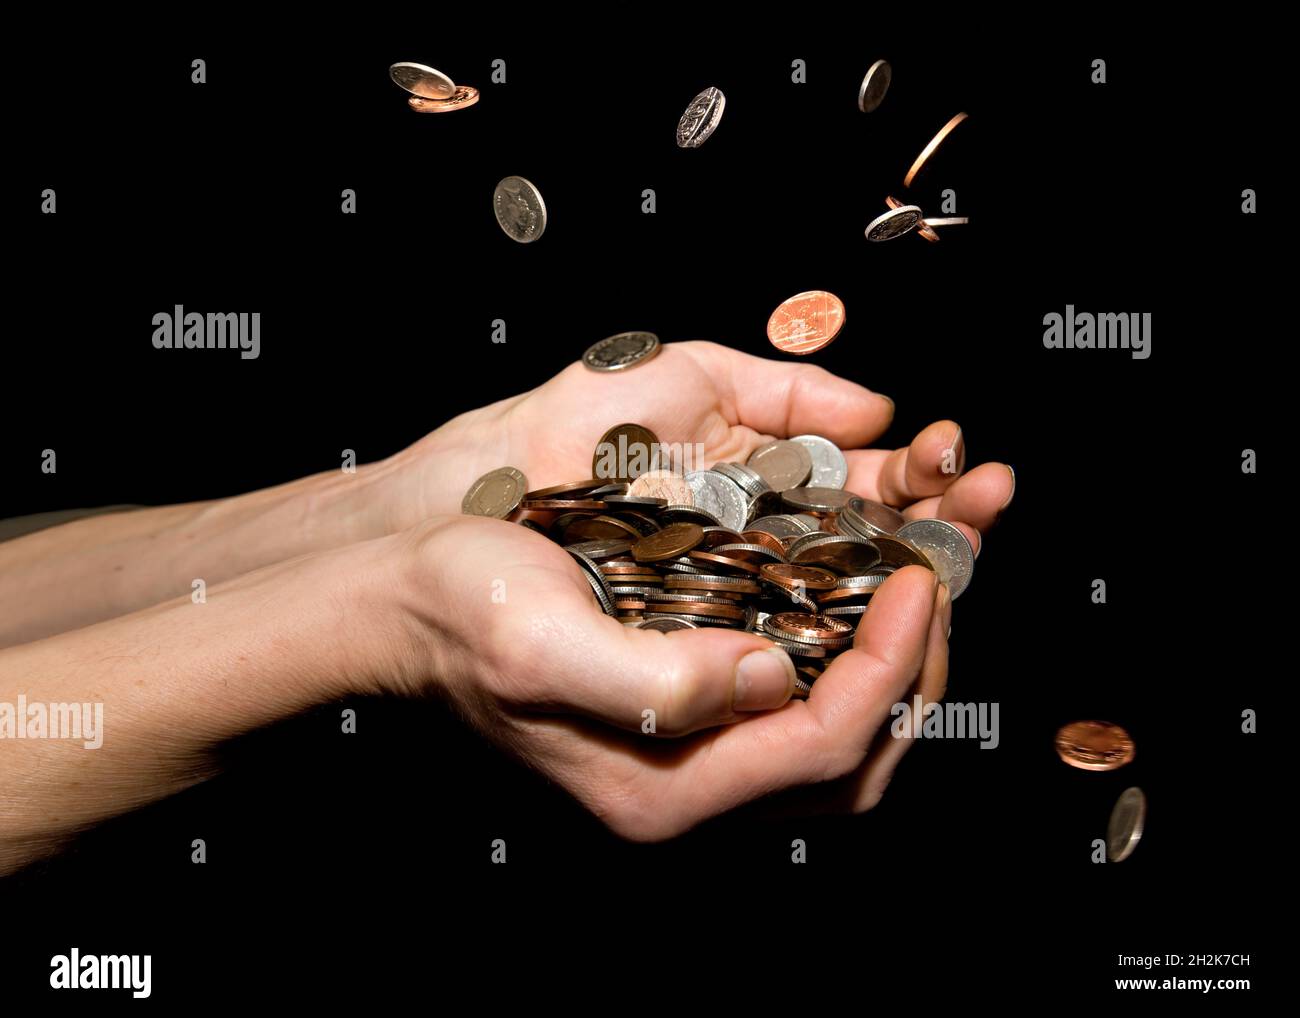 Caucasian male (42 yrs old) with hands held out trying to catch money, depicting the concept ‘its raining money’ or ‘money falling from the sky’ or 'p Stock Photo